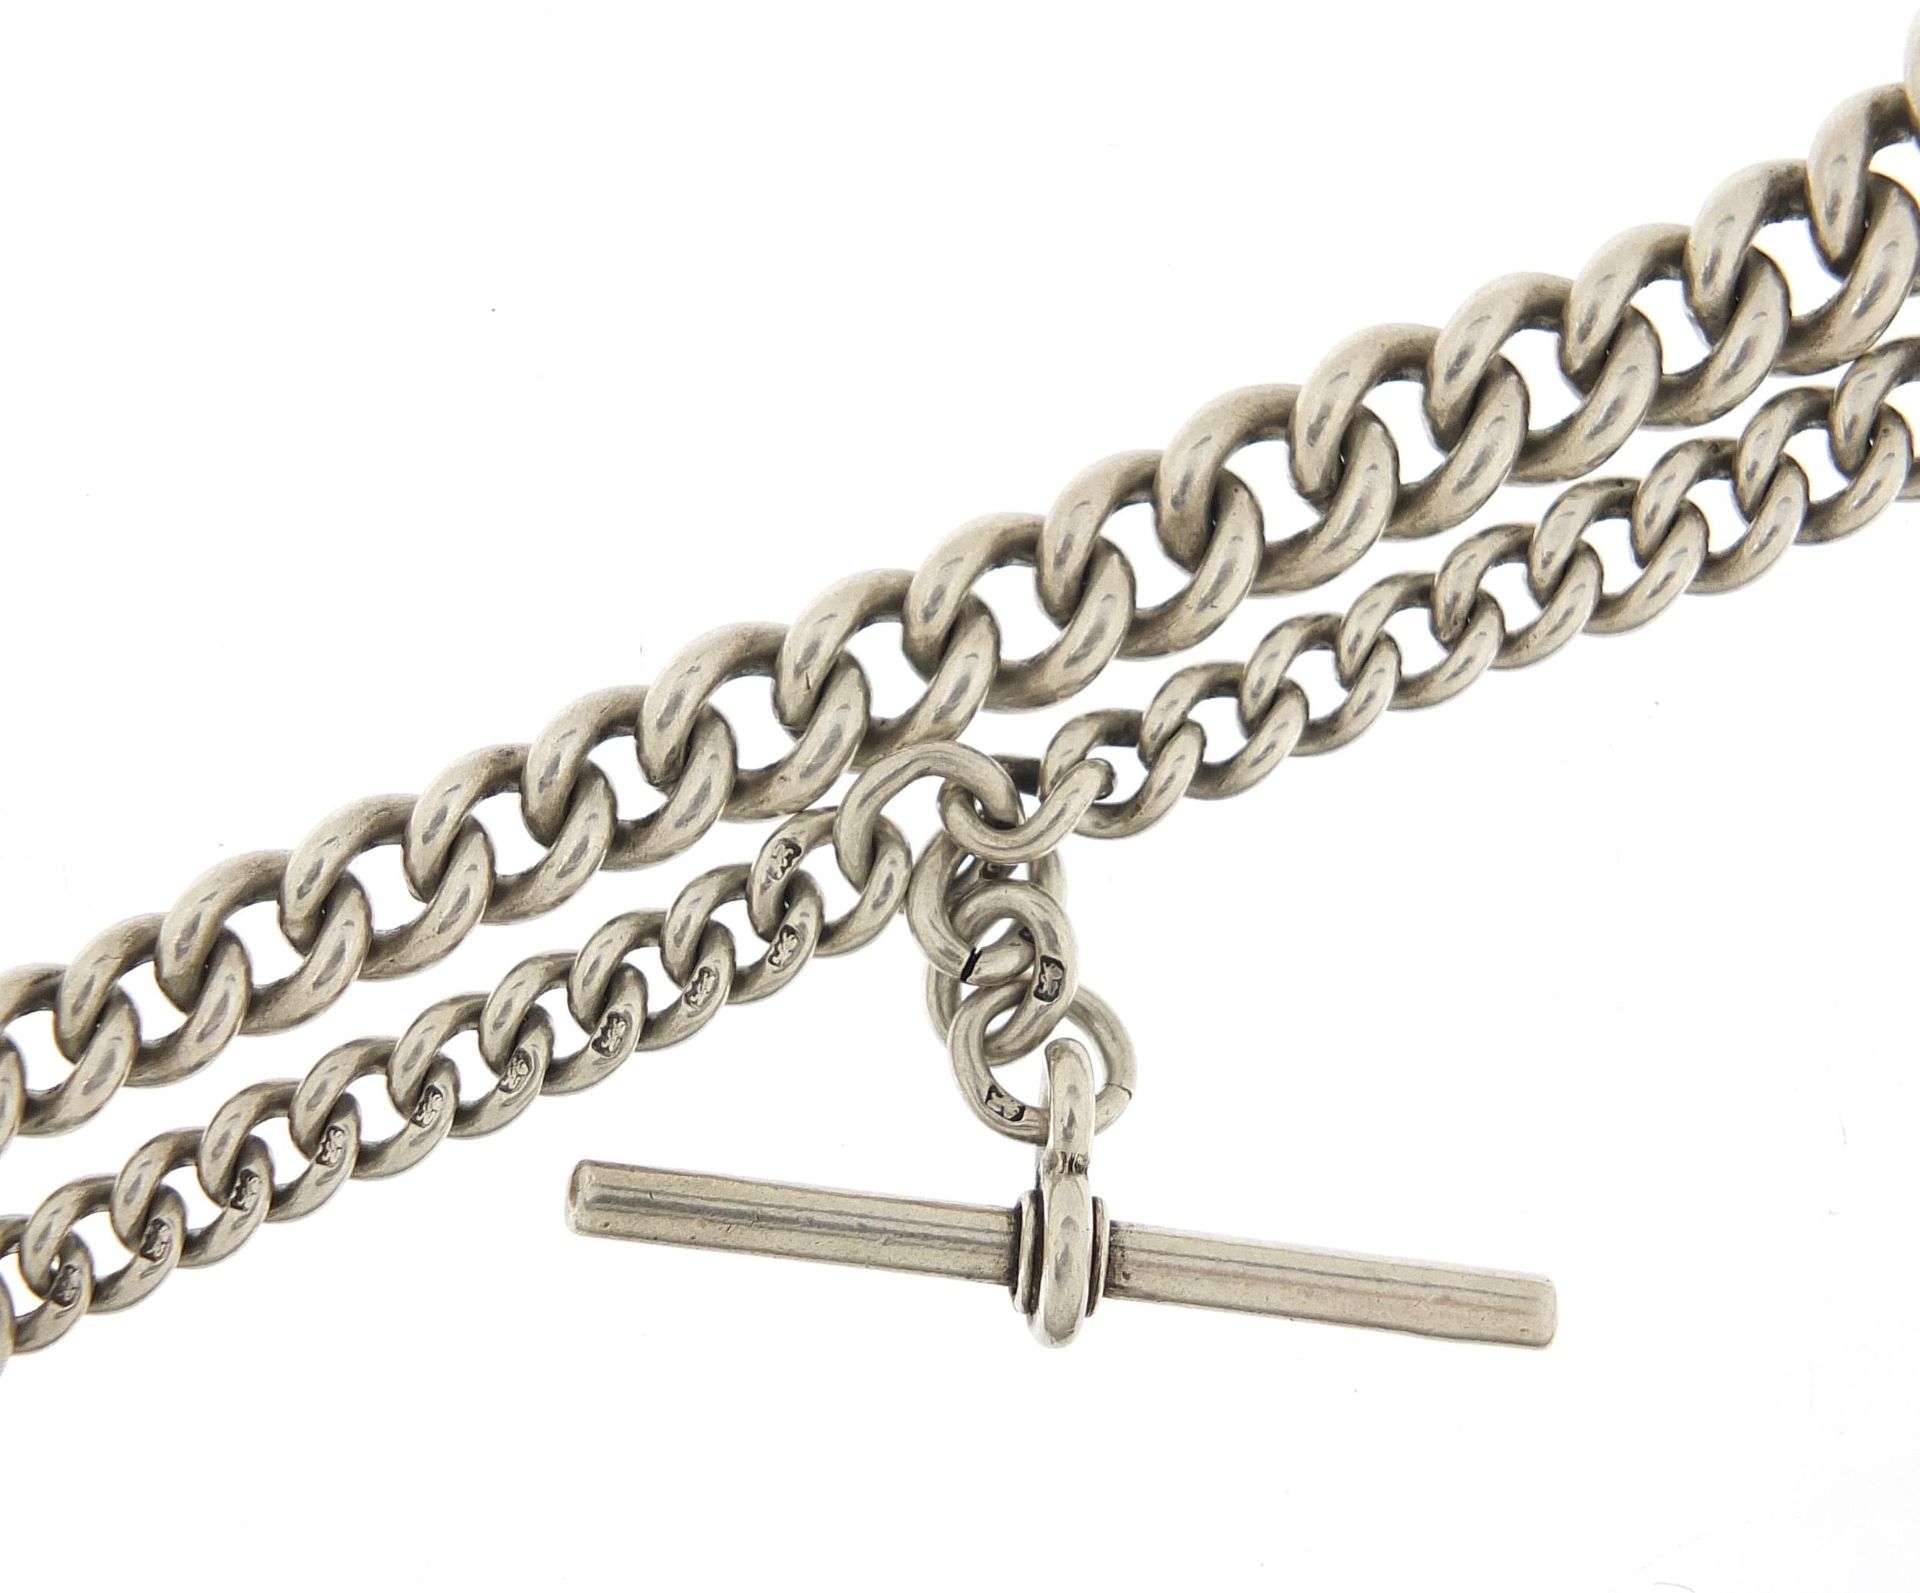 Graduated silver watch chain with T bar, 32cm in length, 45.0g